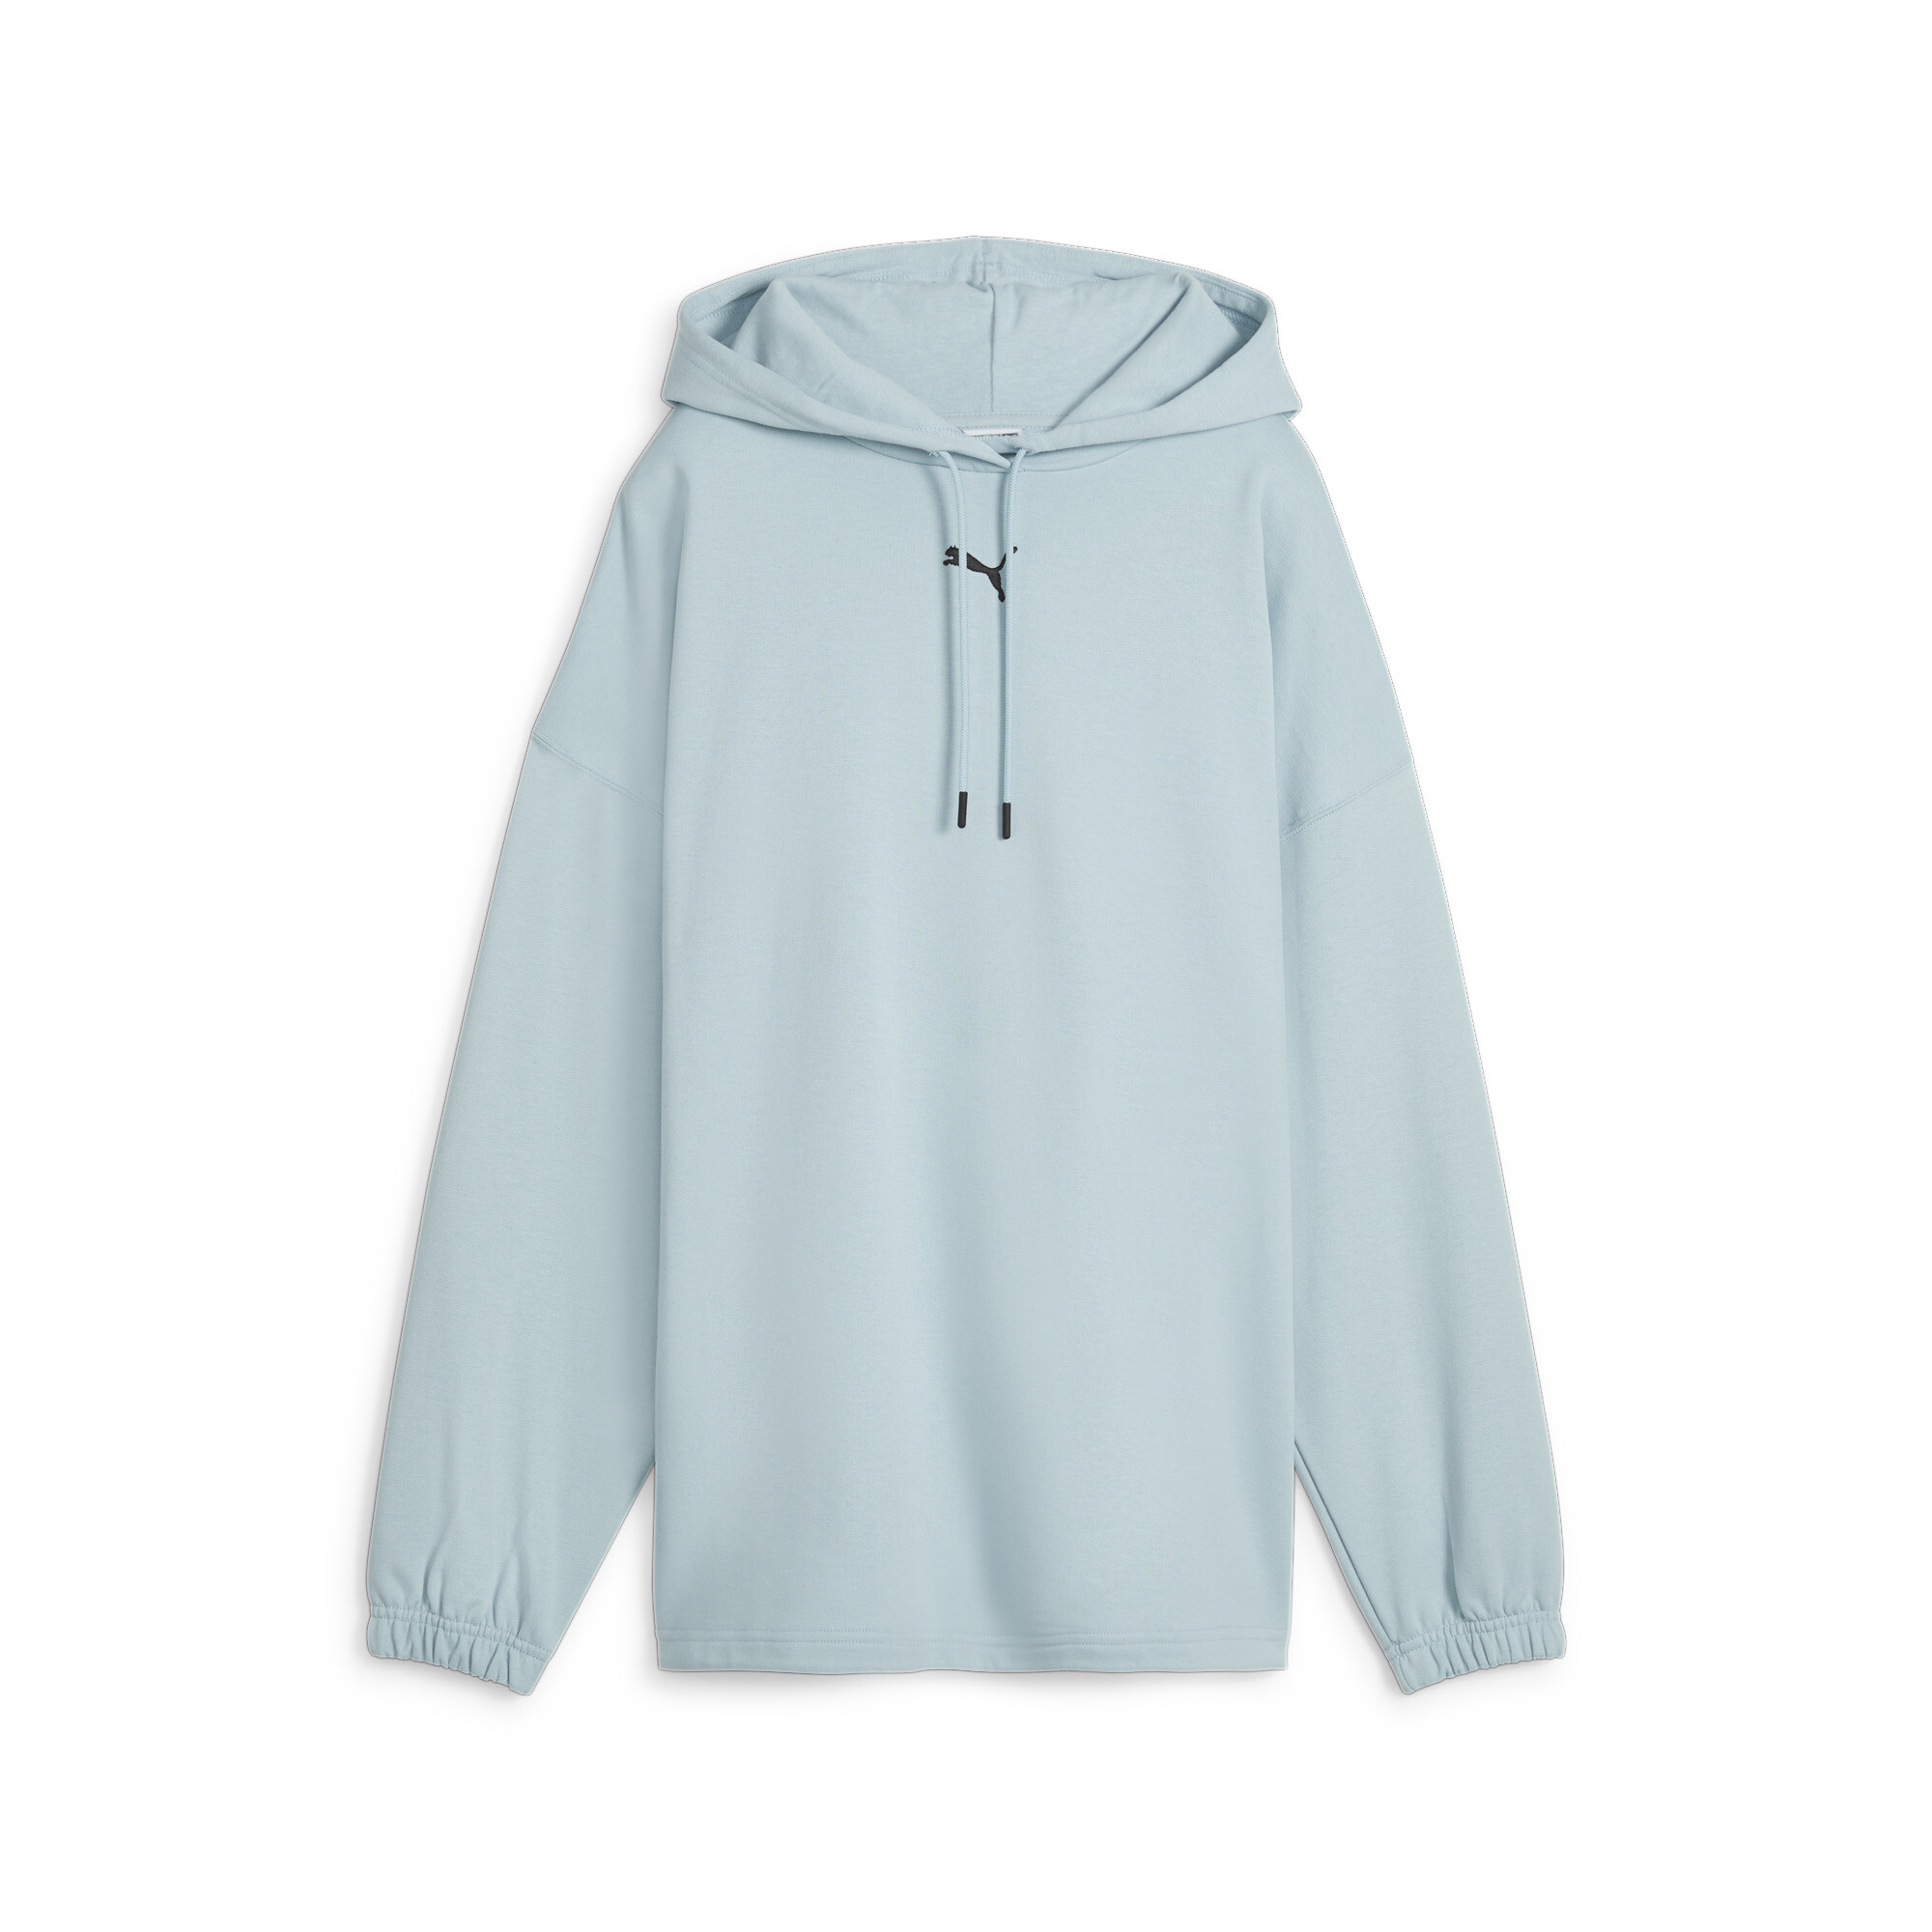 Women's PUMA DARE TO Oversized Hoodie In Blue, Size Large